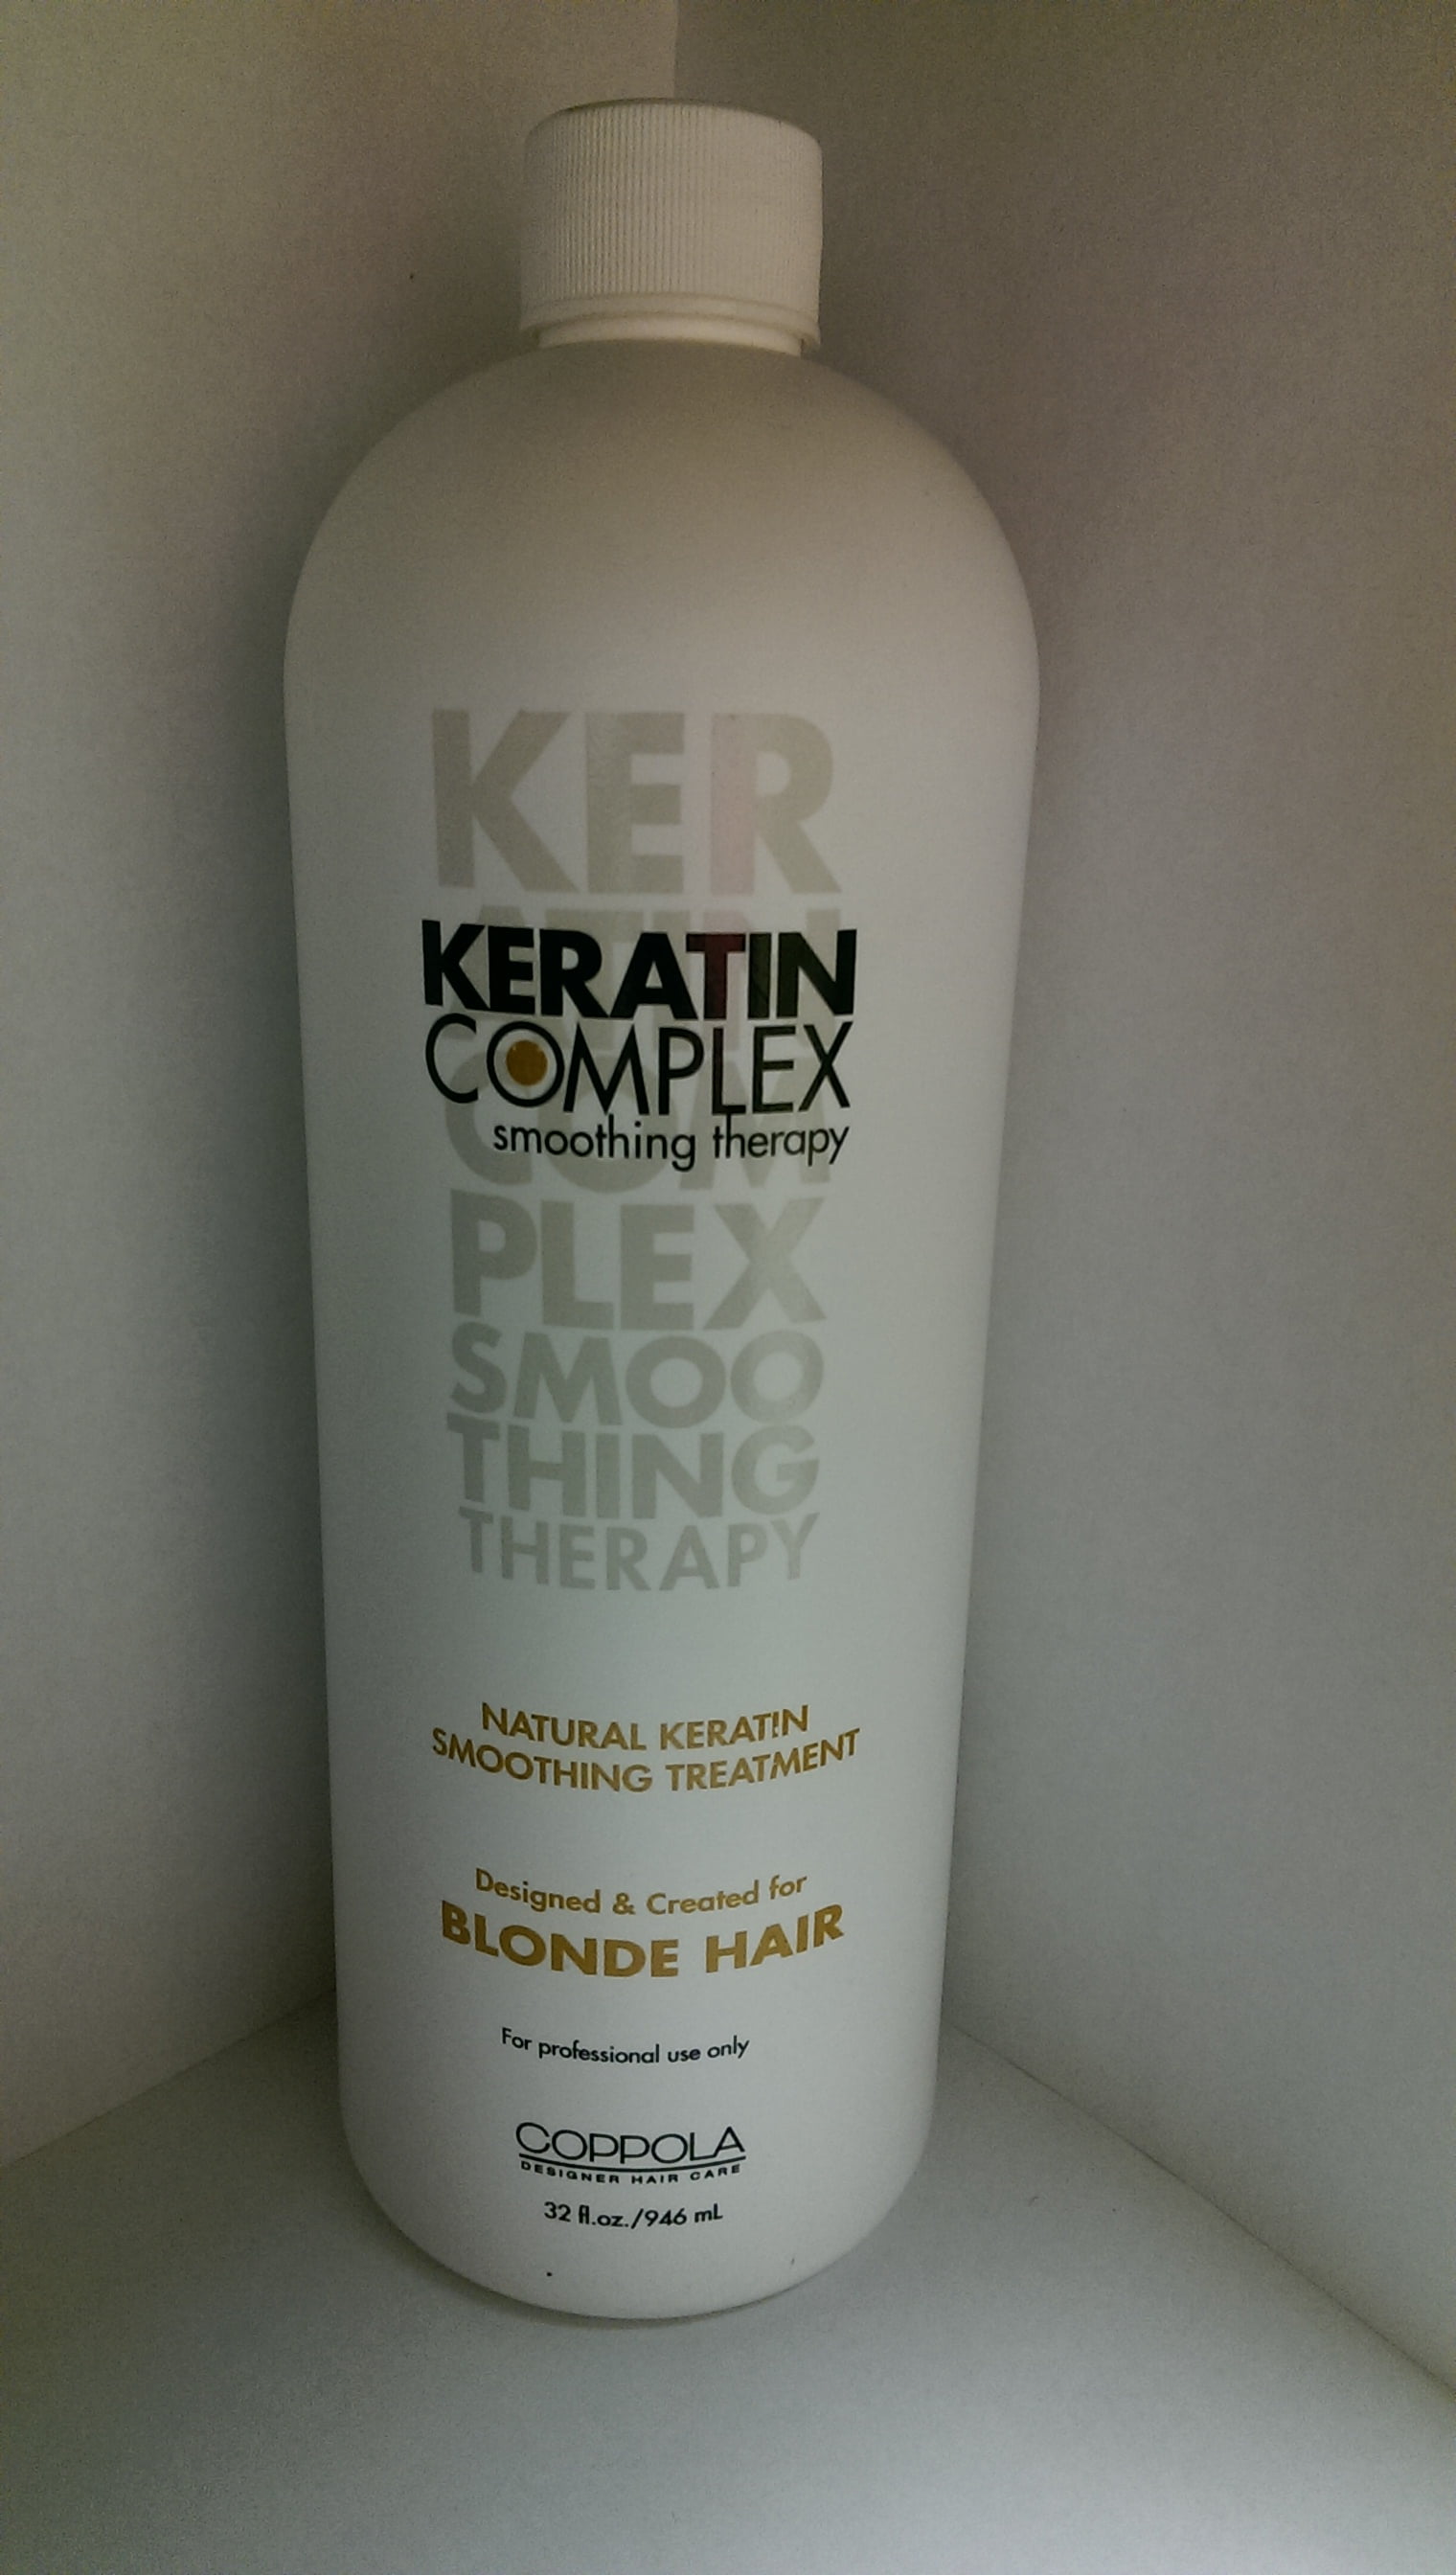 Global Keratin GKhair Cashmere Hair Smoothing Cream 50ml 169 fl oz   Leave in Conditioner Cream 130ml For Detangling Smoothing Strengthening   Walmartcom